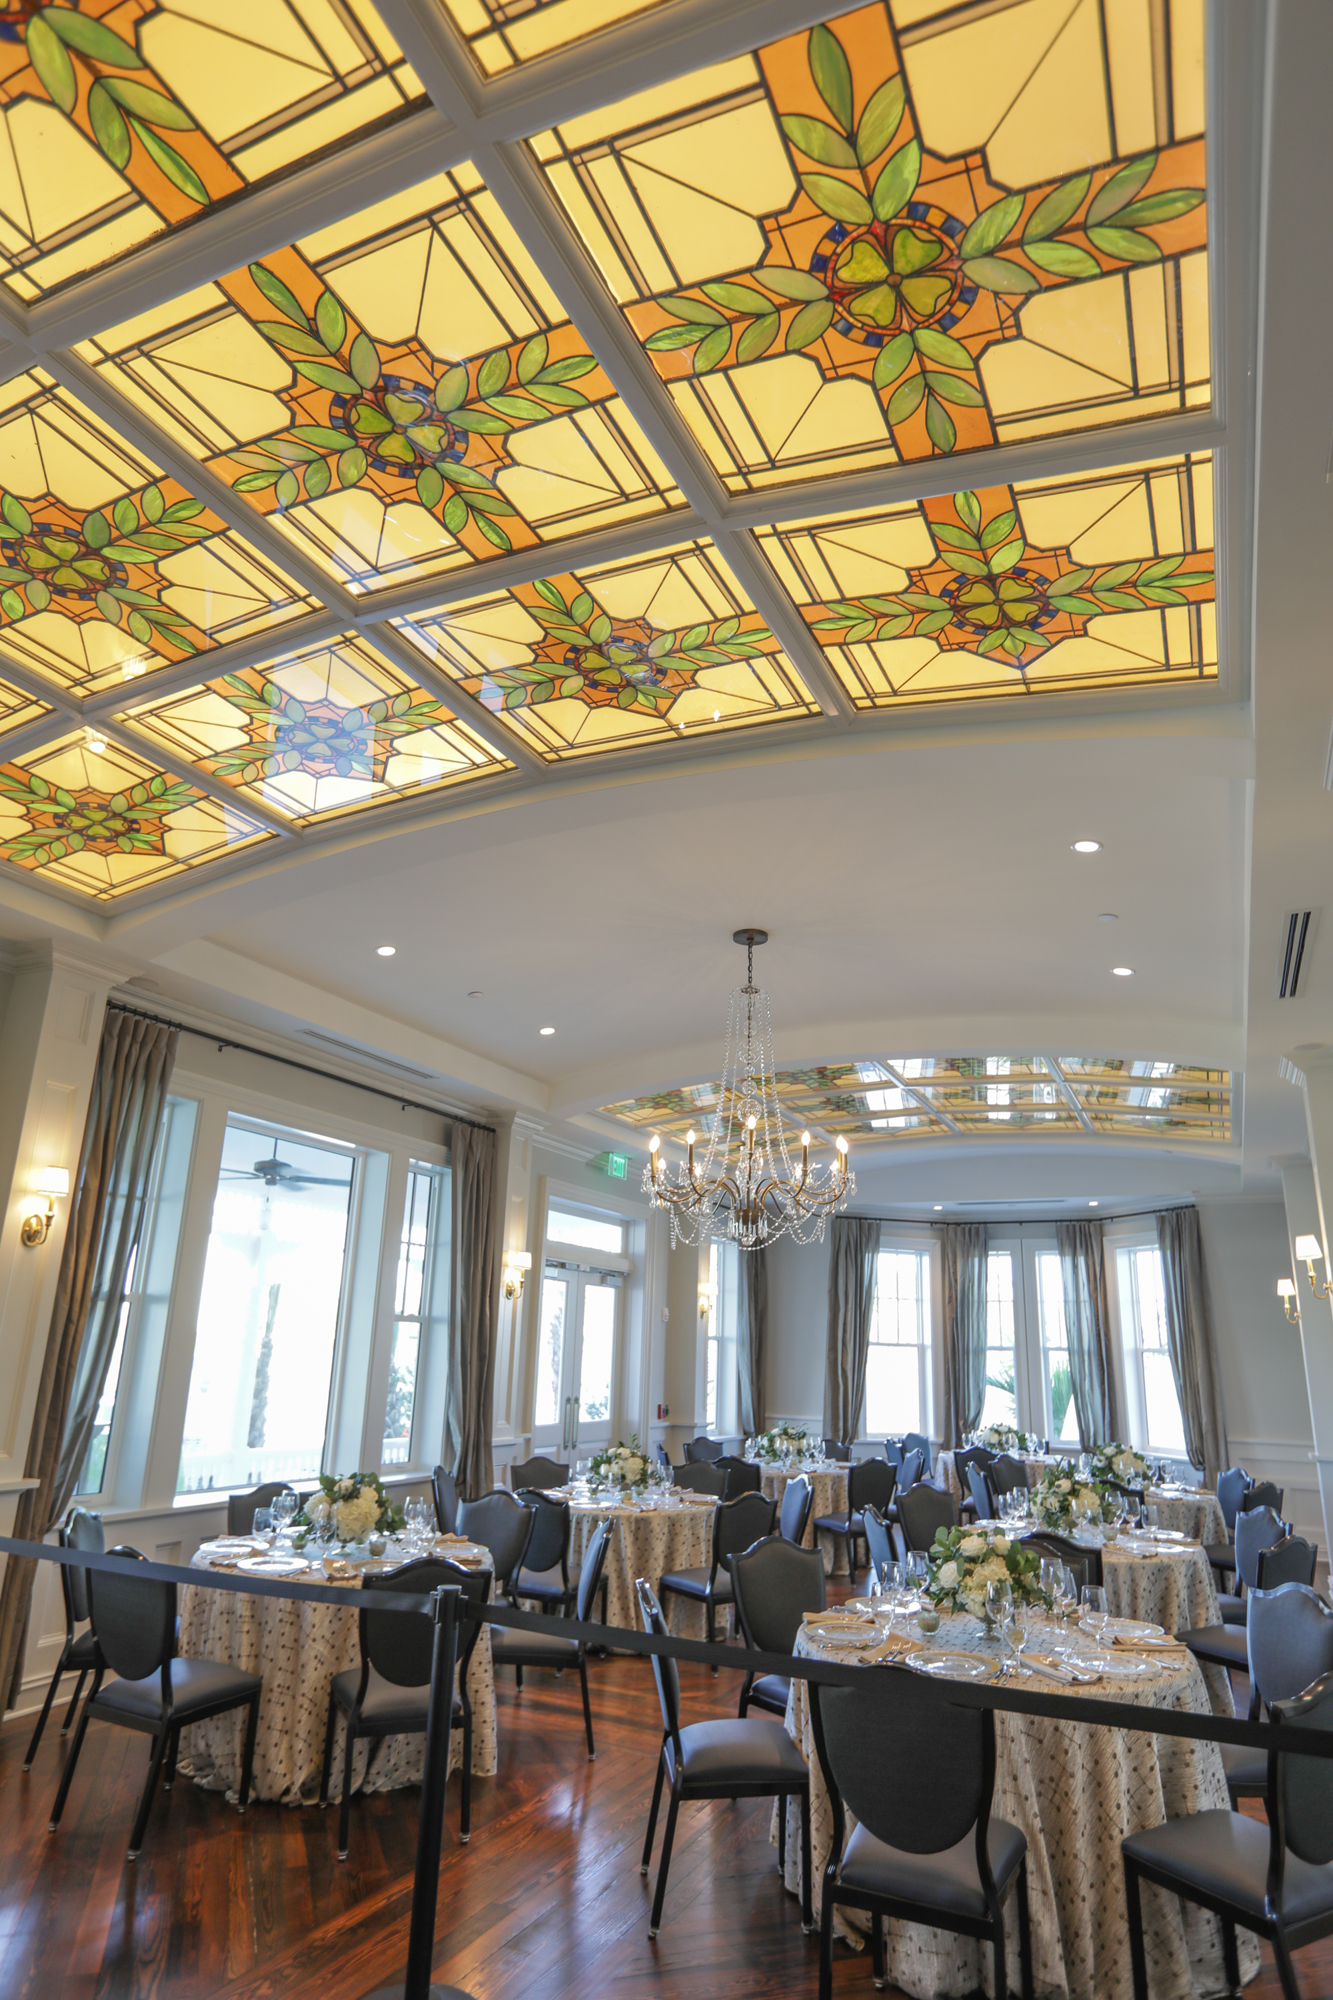 Portions of the Belleview Biltmore Hotel's original Tiffany stained-glass ceiling have been retained in the new Belleview Inn. Courtesy photo.